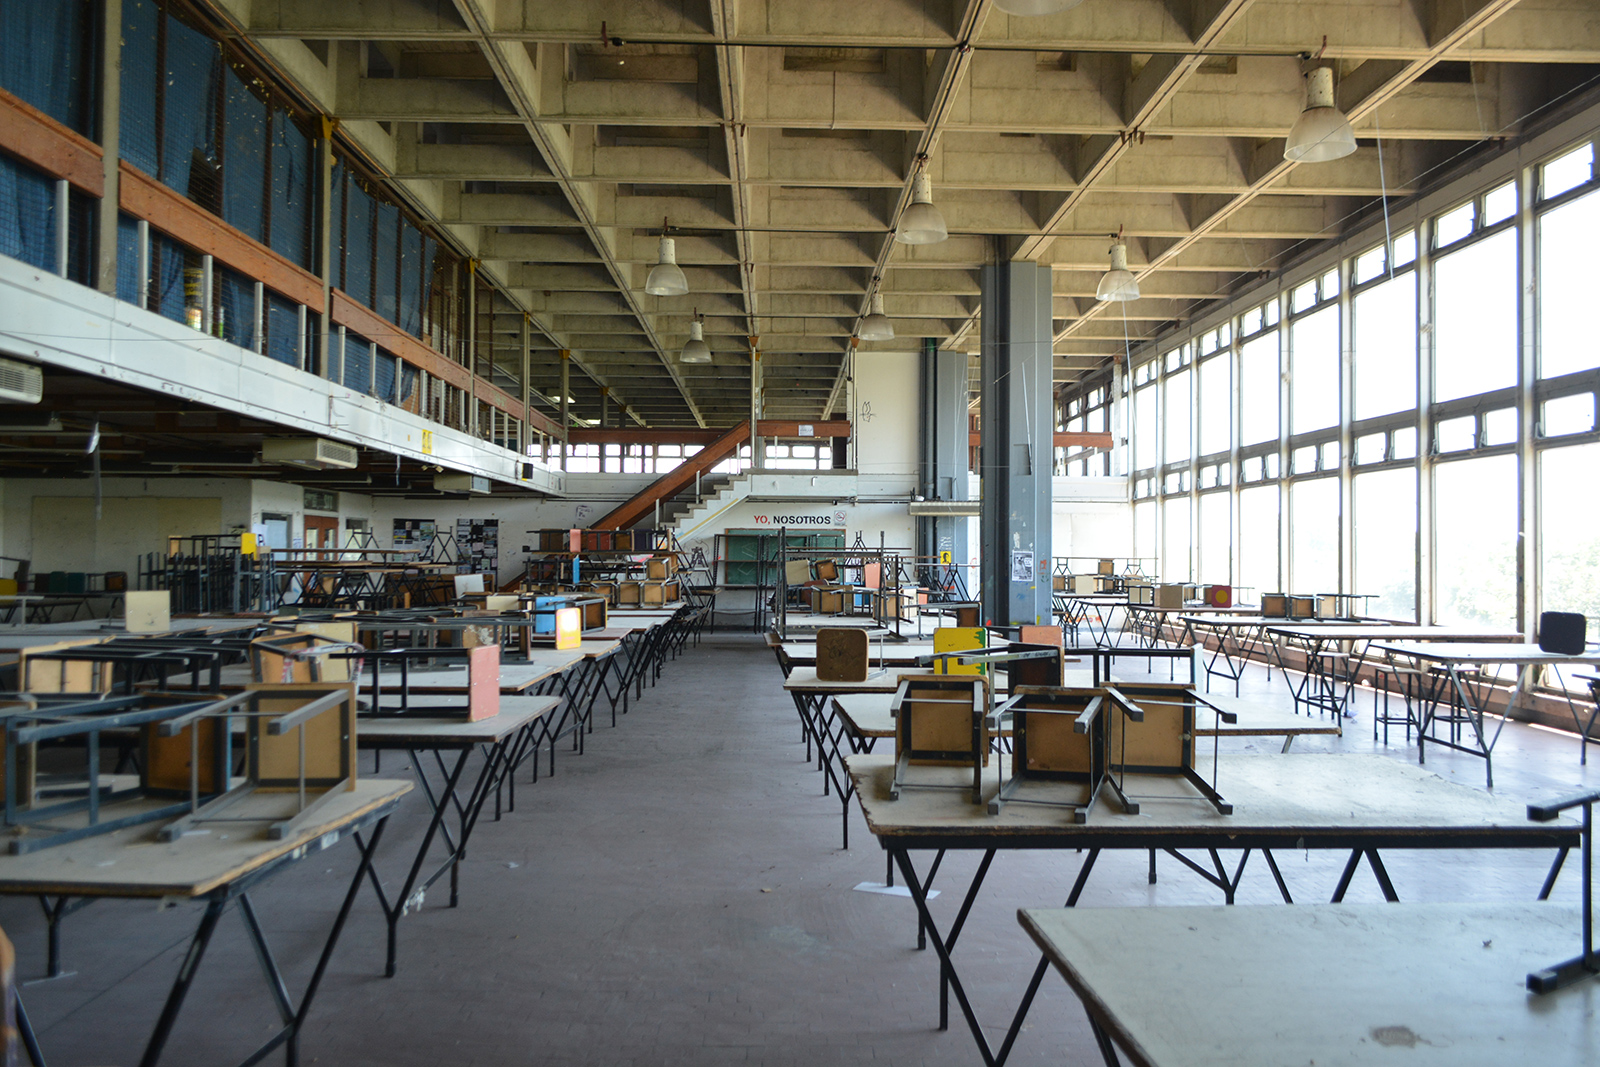 Brutalist Buenos Aires: Inside the Faculty of Architecture and Urban Design